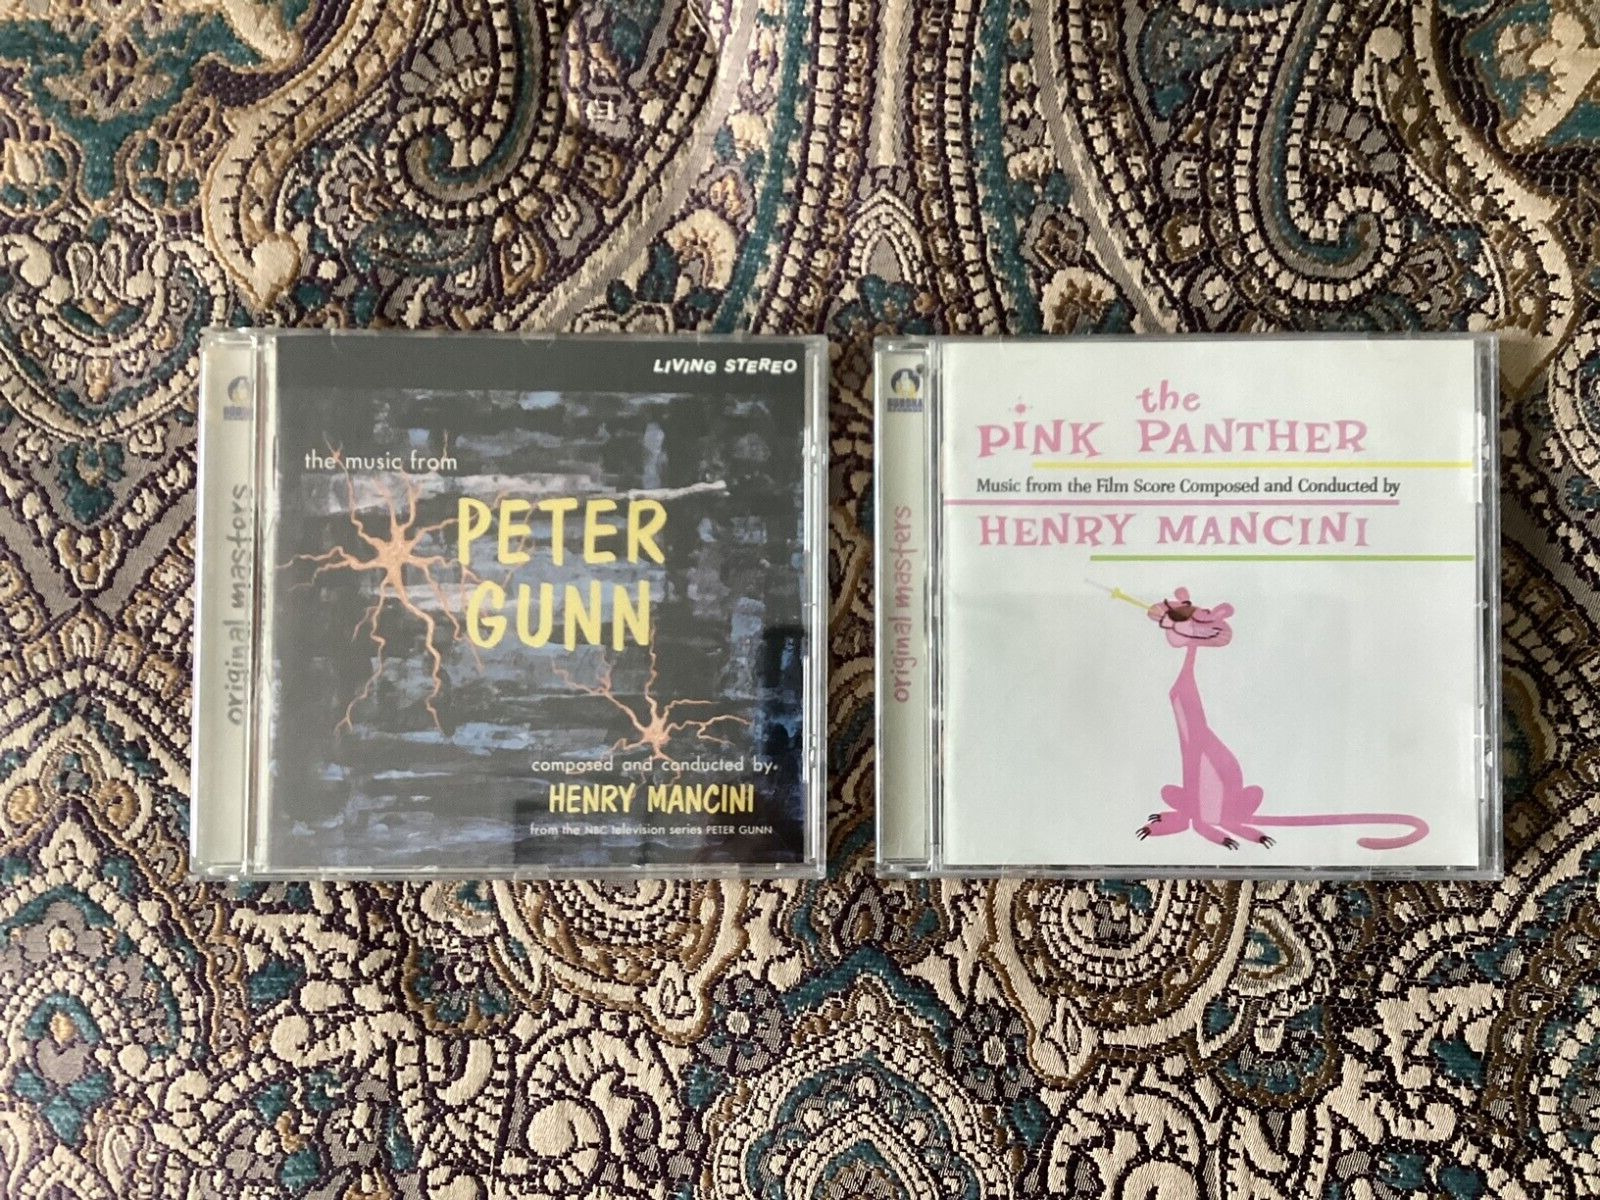 HENRY MANCINI *2 CD Lot* PETER GUNN & THE PINK PANTHER Remasters